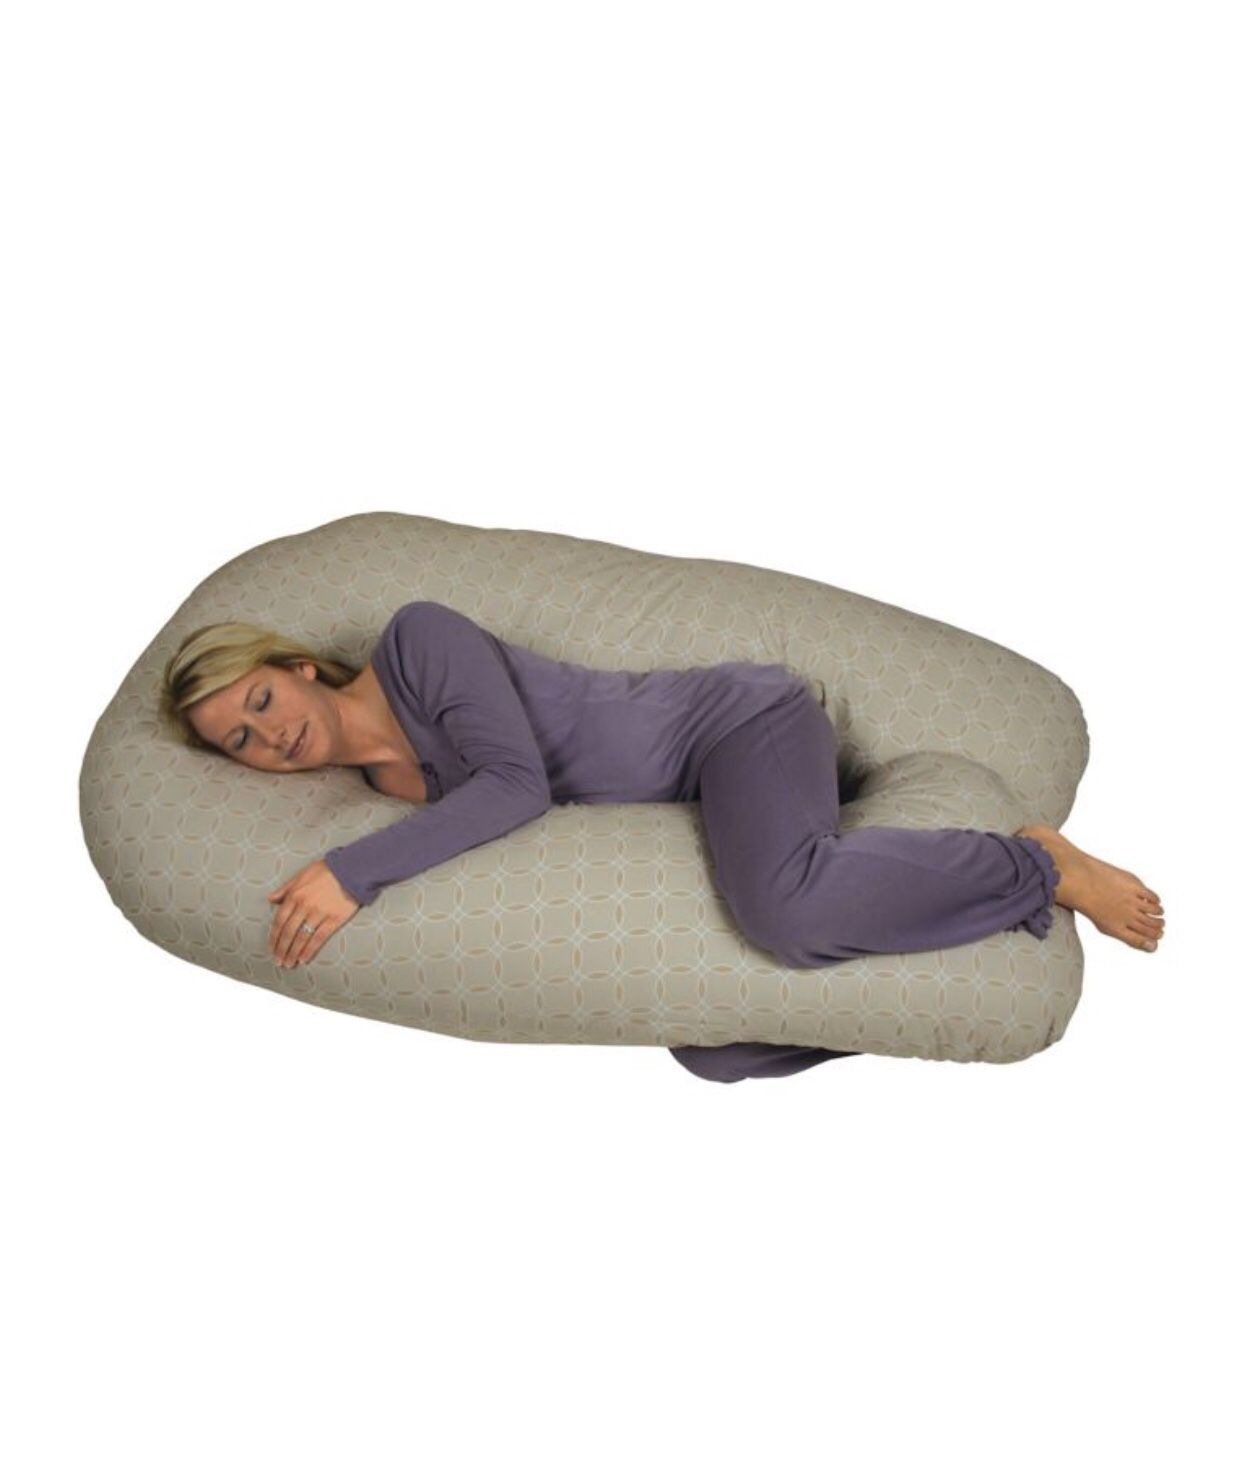 Leachco Back N' Belly Chic Contoured Body Pillow